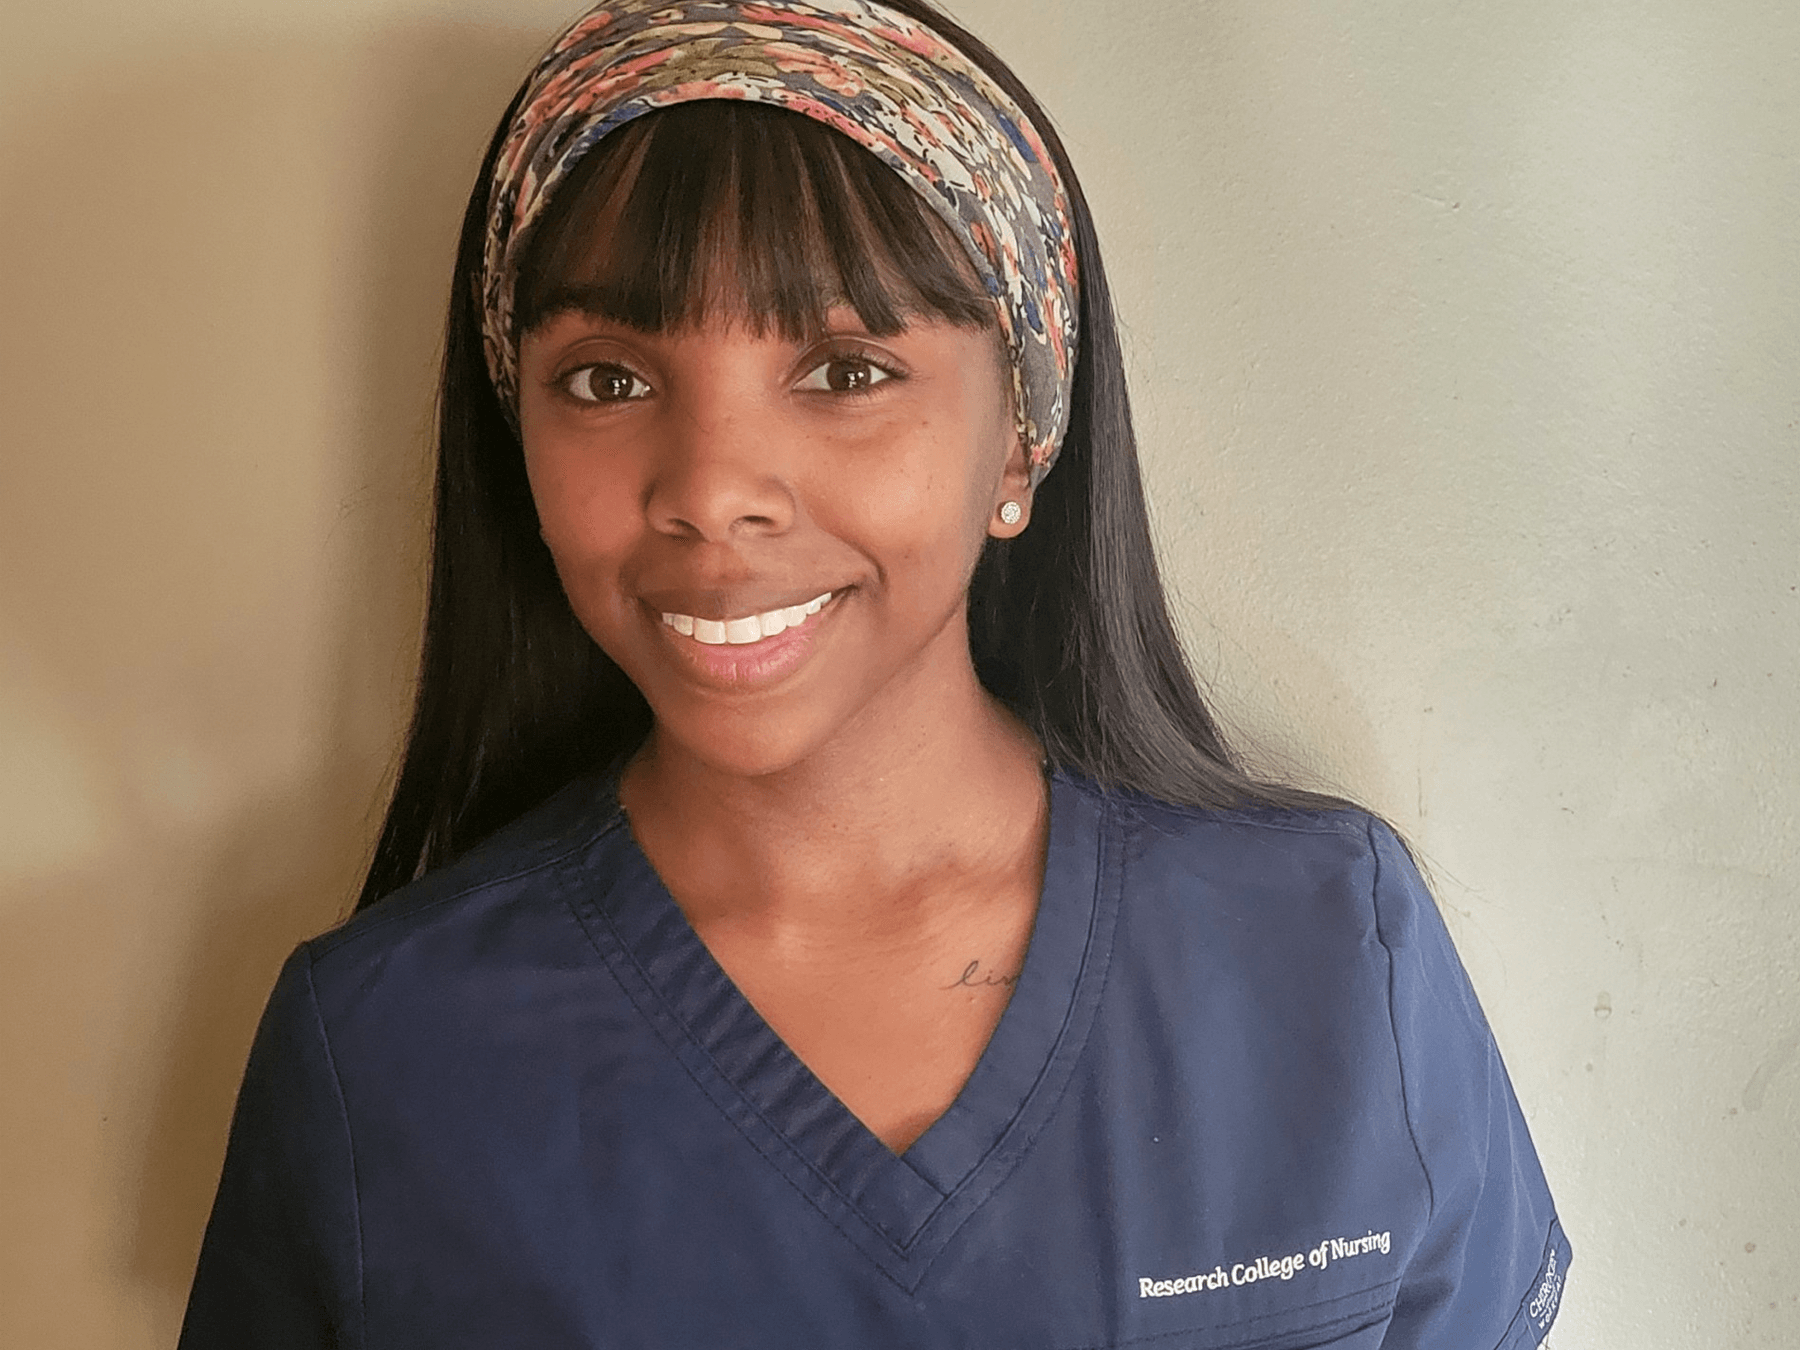 Giving Tuesday provides opportunity to help nursing students facing emergencies